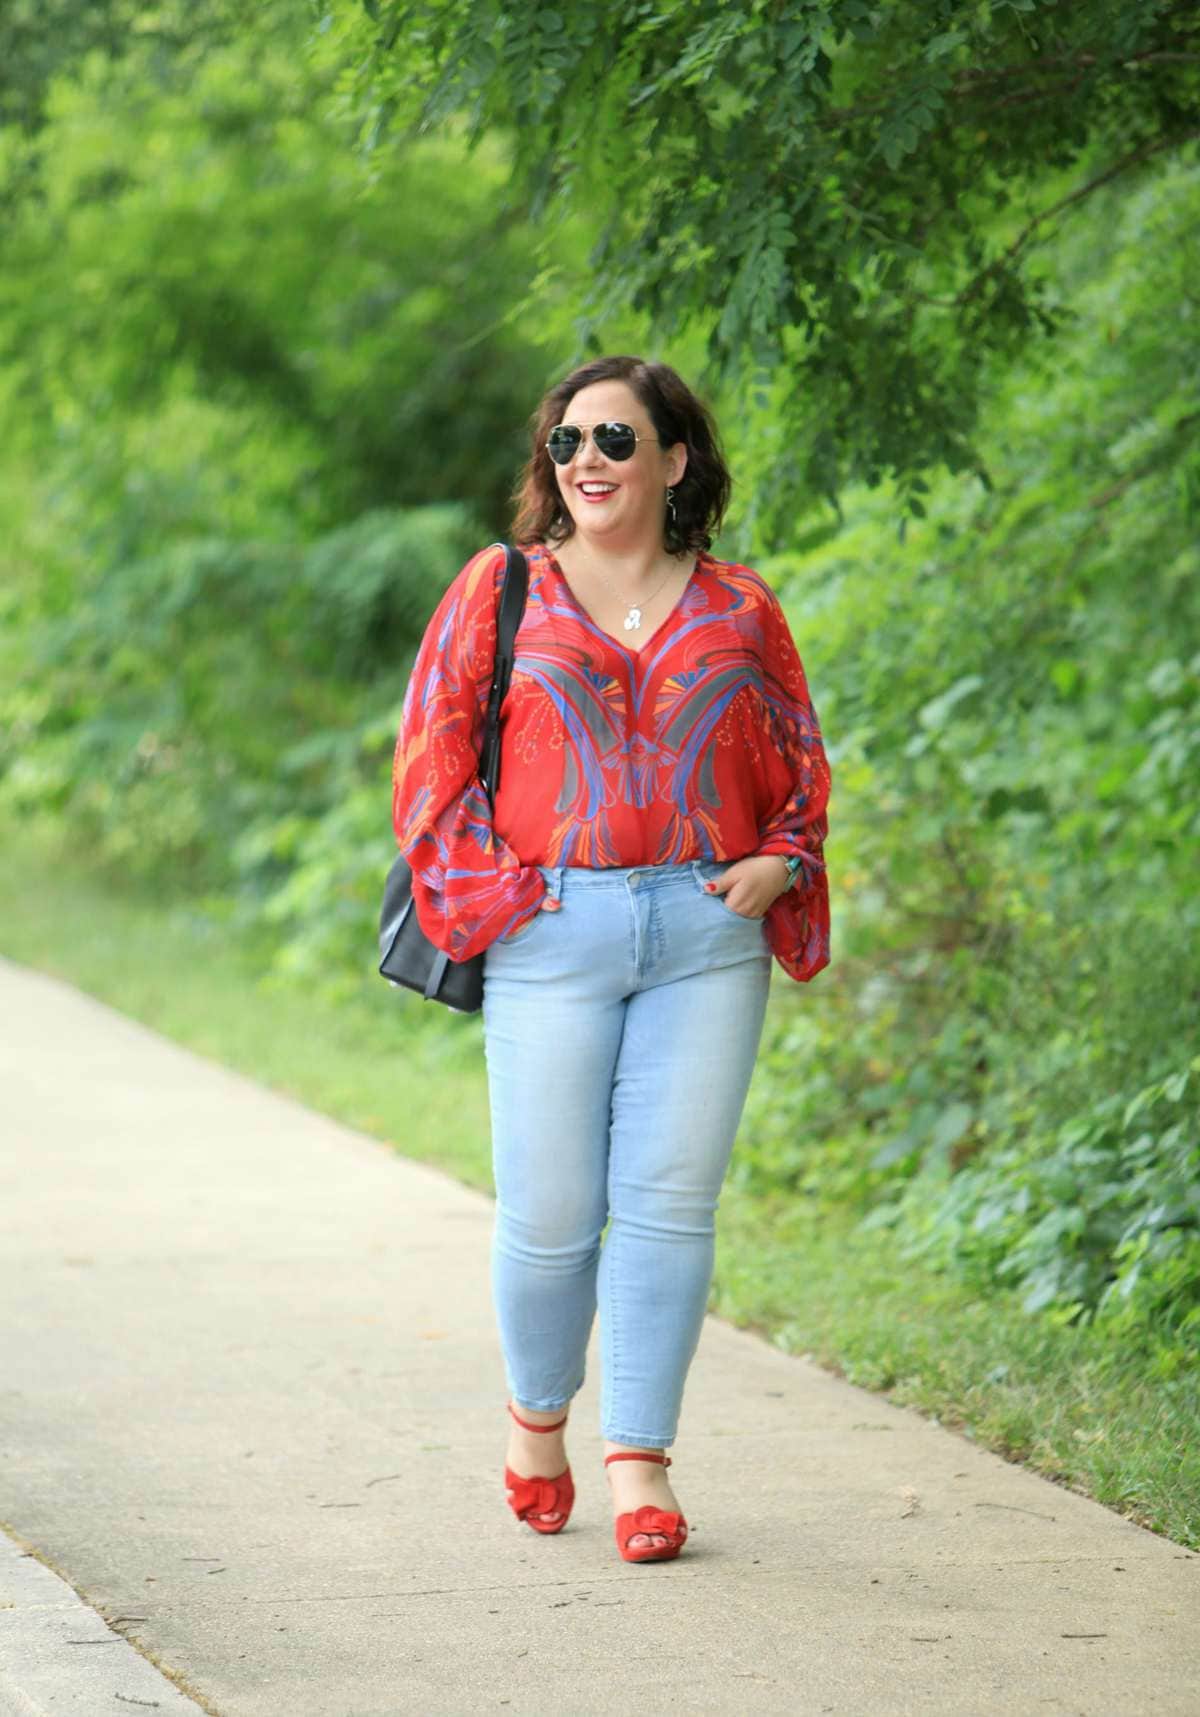 Alison Gary of Wardrobe Oxygen wearing a red printed chiffon blouse from Free People with light wash ankle jeans, carrying a black leather tote bag and wearing red suede platform heeled sandals